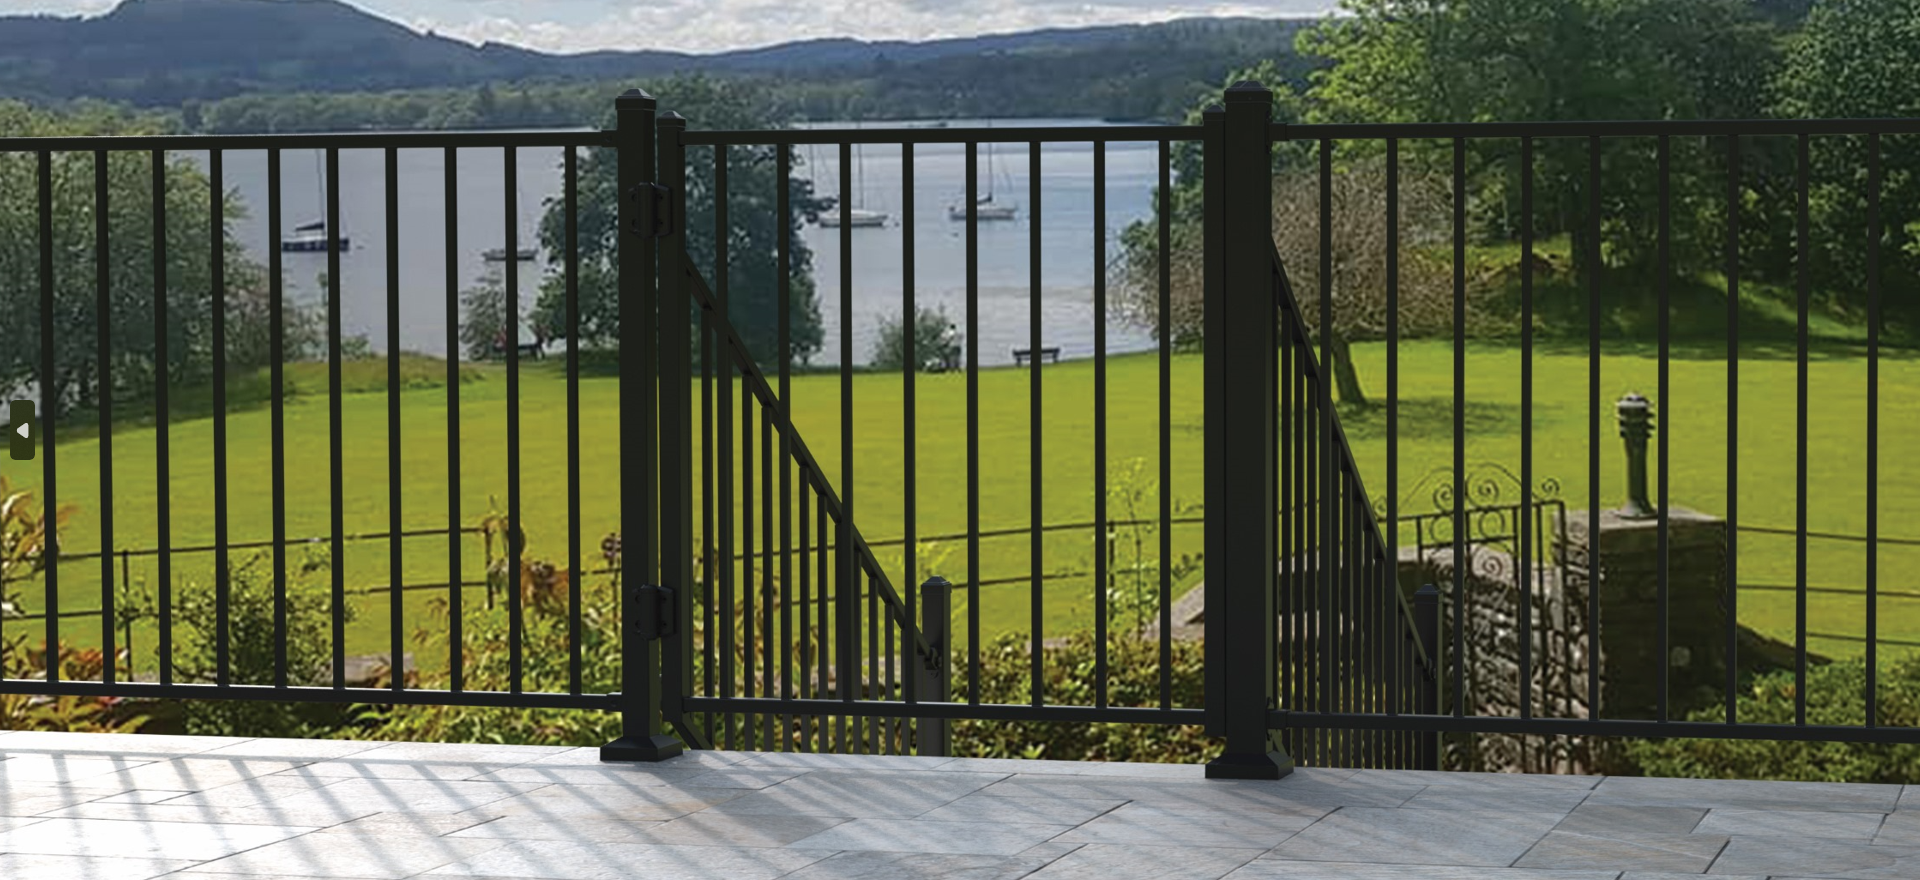 Fortitude Traditional Railings Steel Handrail Balustrade system from FH Brundle